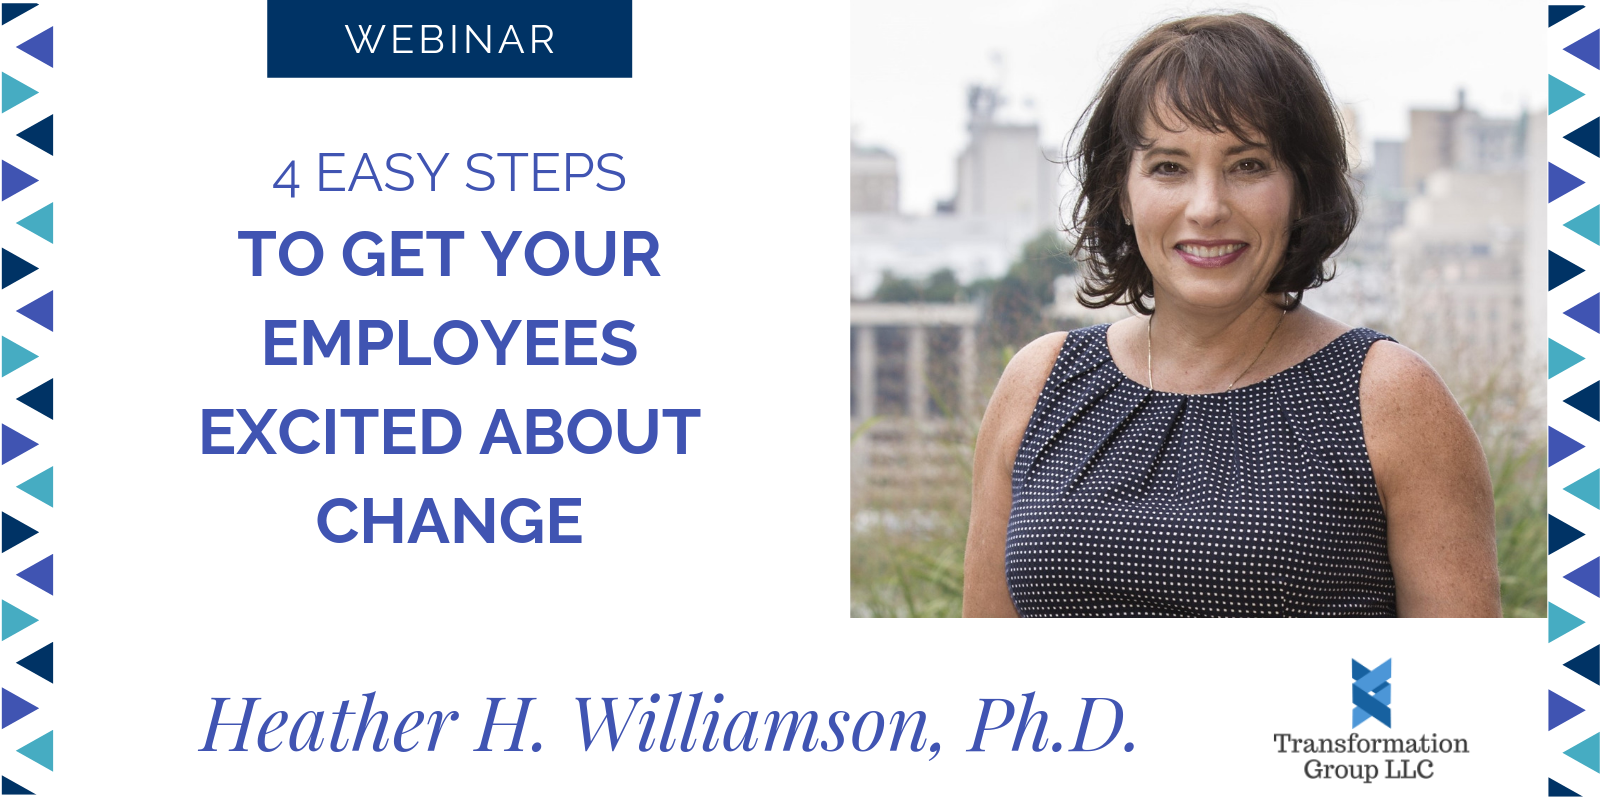 4 Easy Steps To Get Your Employees Excited About Change (Webinar)